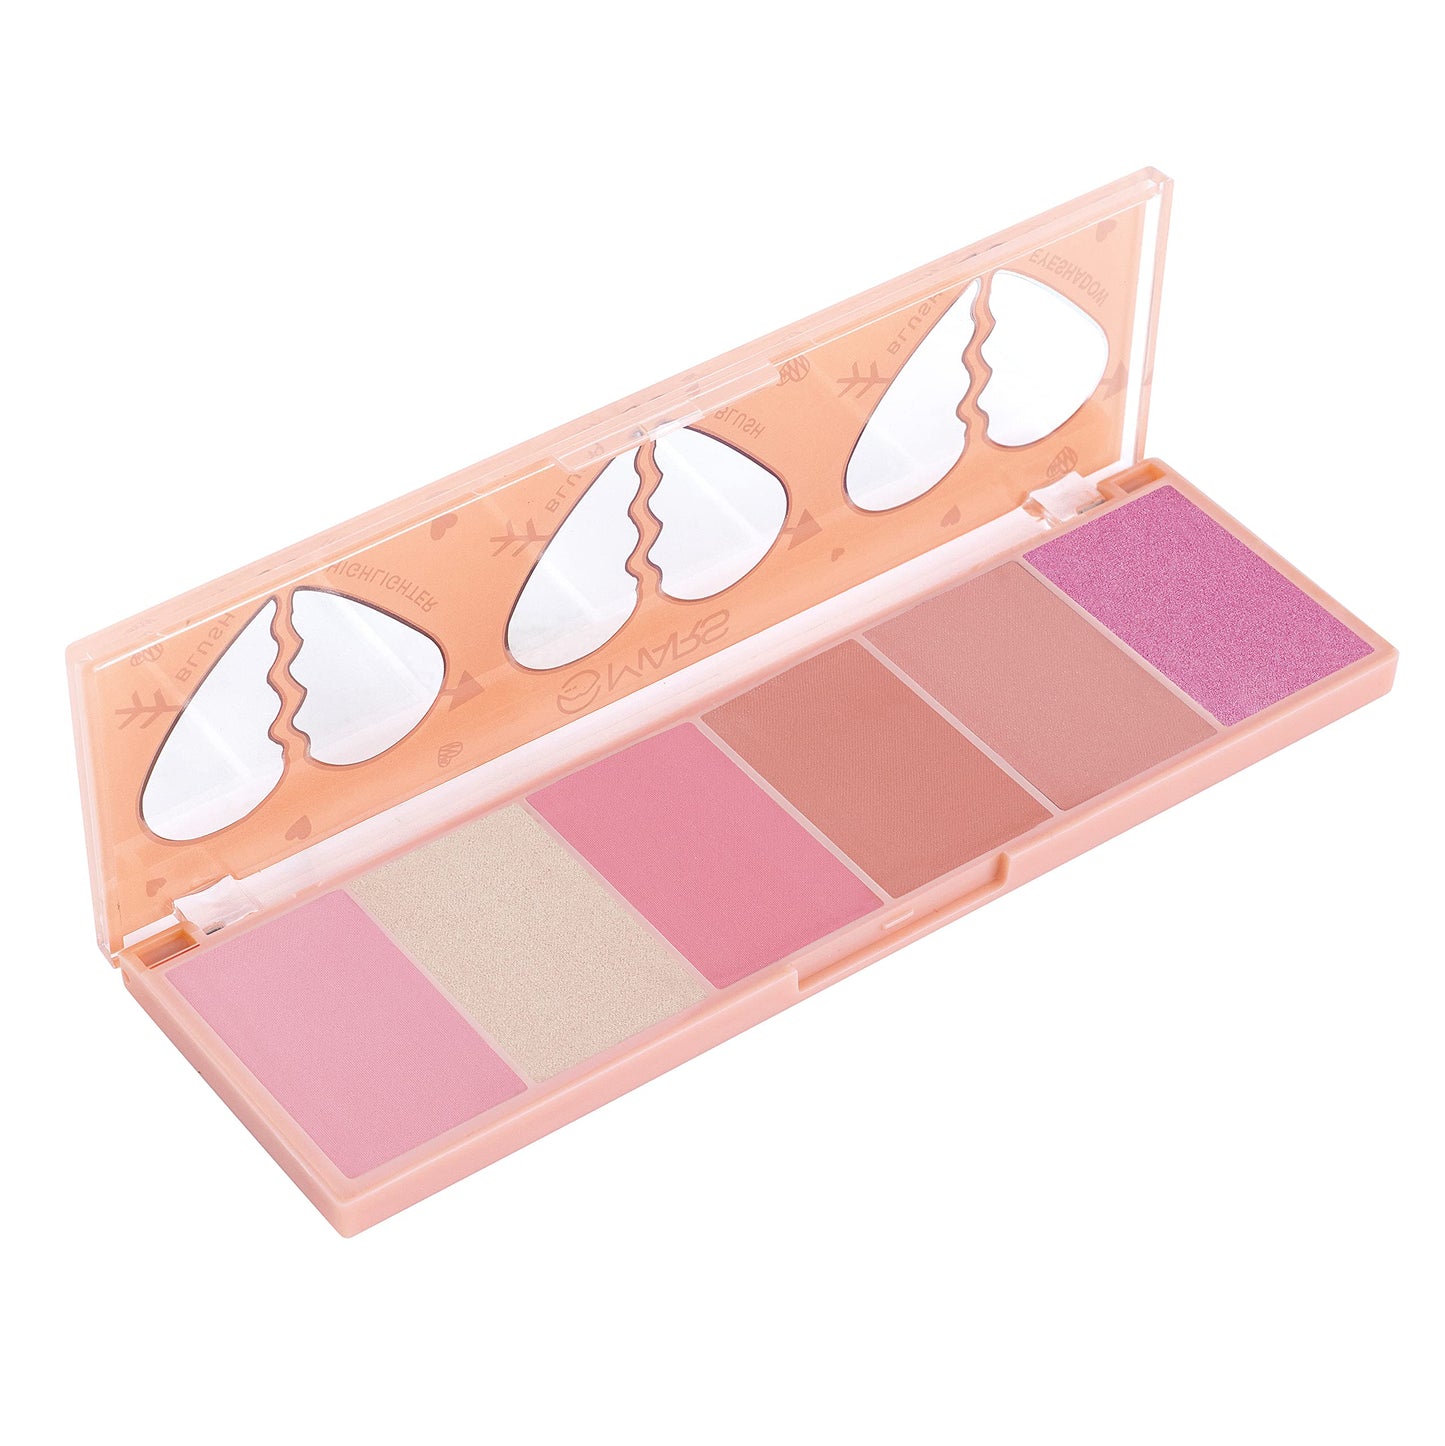 MARS Little 3 in 1 Blusher Palette with Blush, Highlighter and Eyeshadow | Highly Pigmented & Easy to Blend (20g)-Shade-01